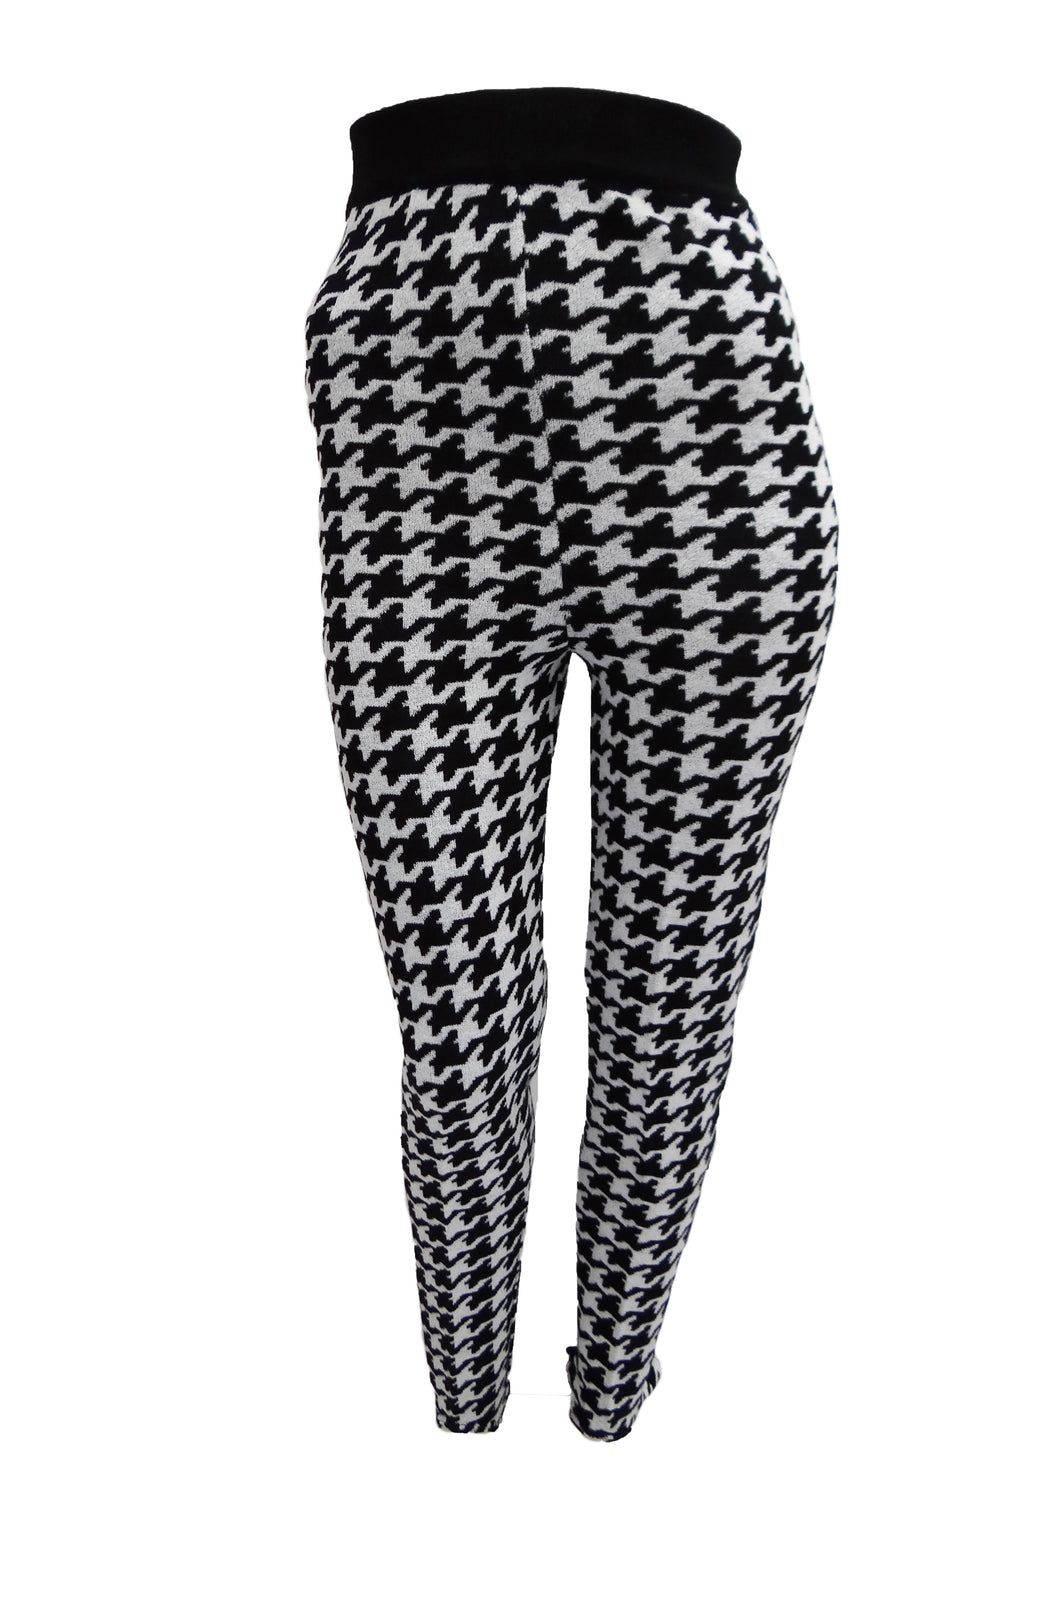 Traditional check tights